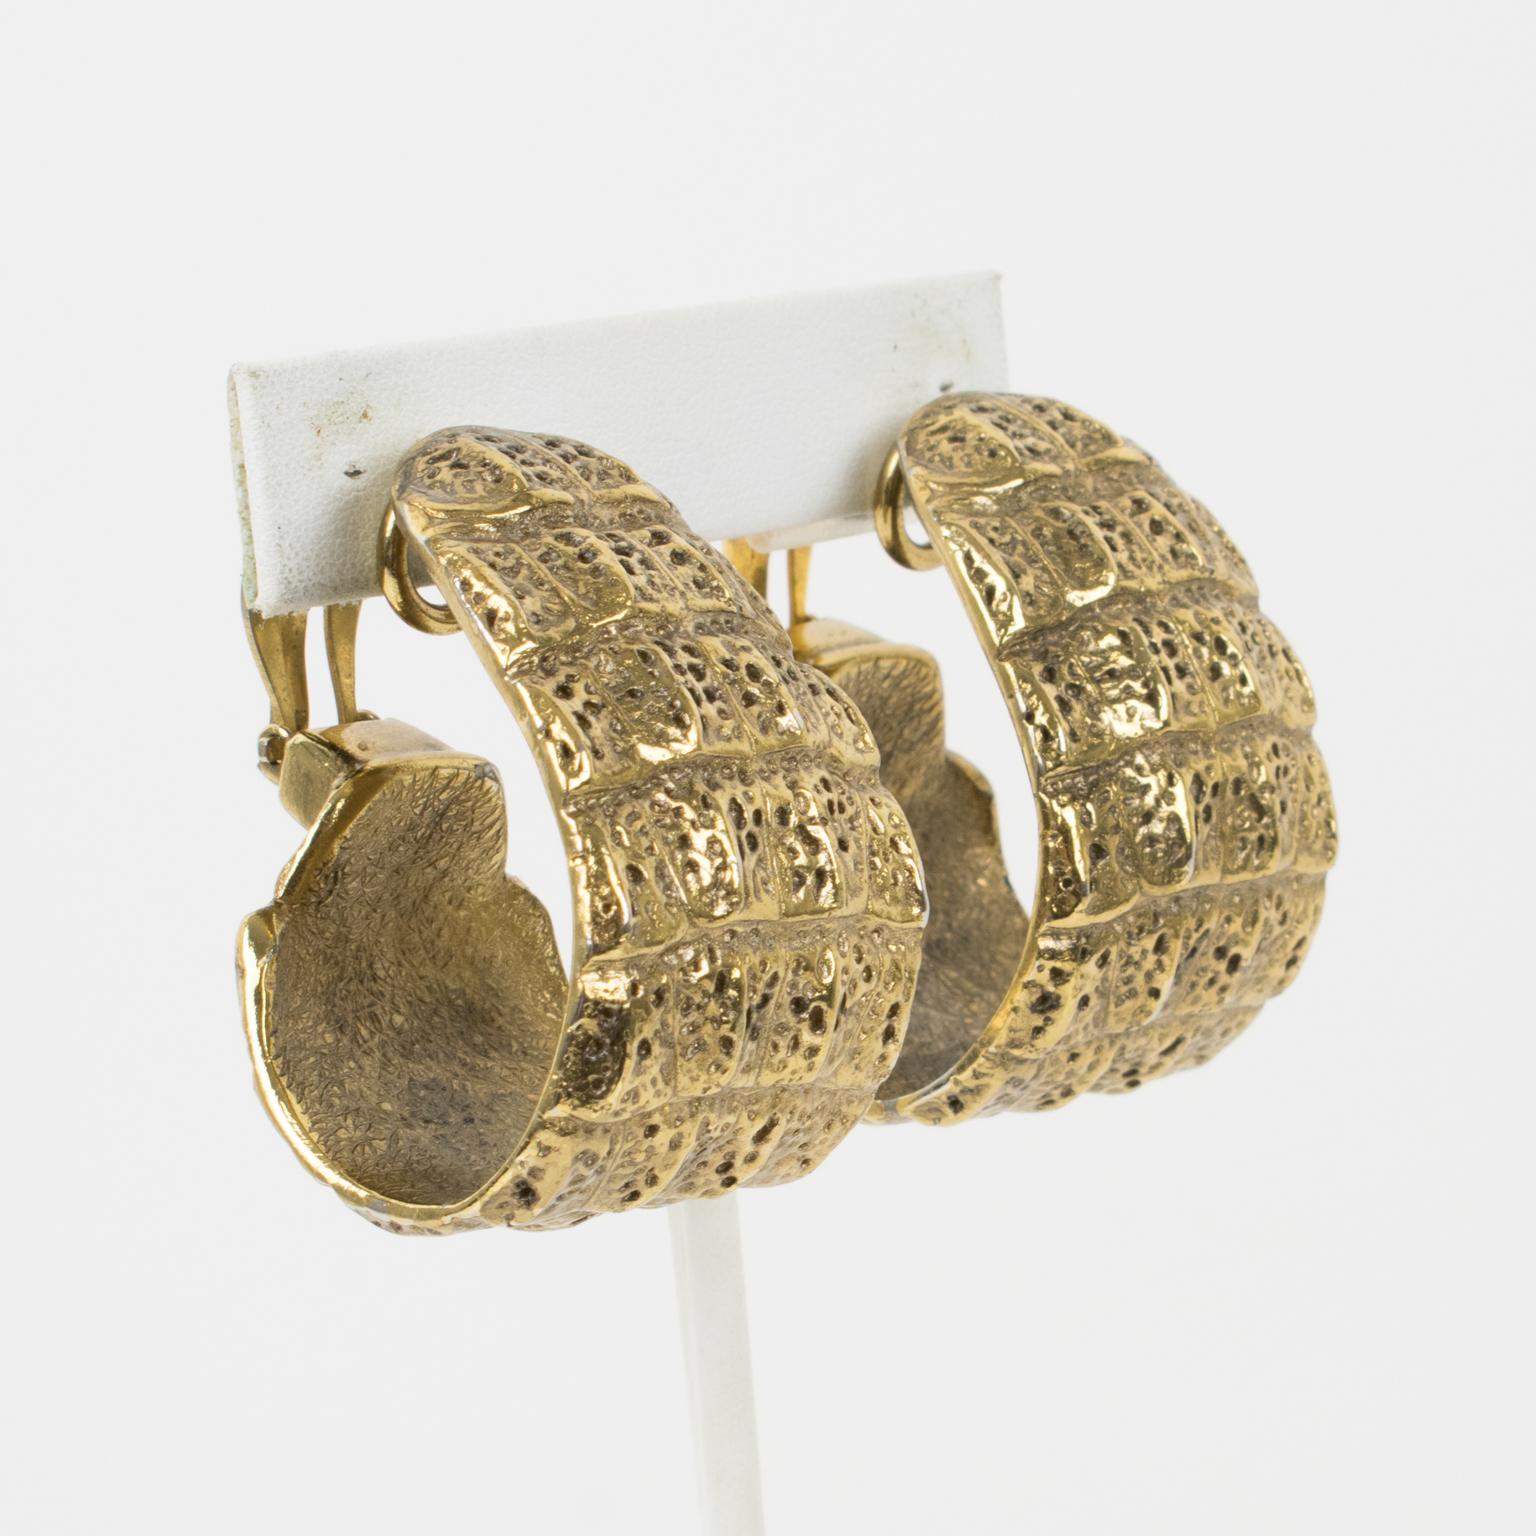 These stylish Yves Saint Laurent YSL Paris hoop clip-on earrings feature a massive dimensional hoop shape with gilt metal, all textured with a crocodile embossed pattern. The earrings are signed with the 